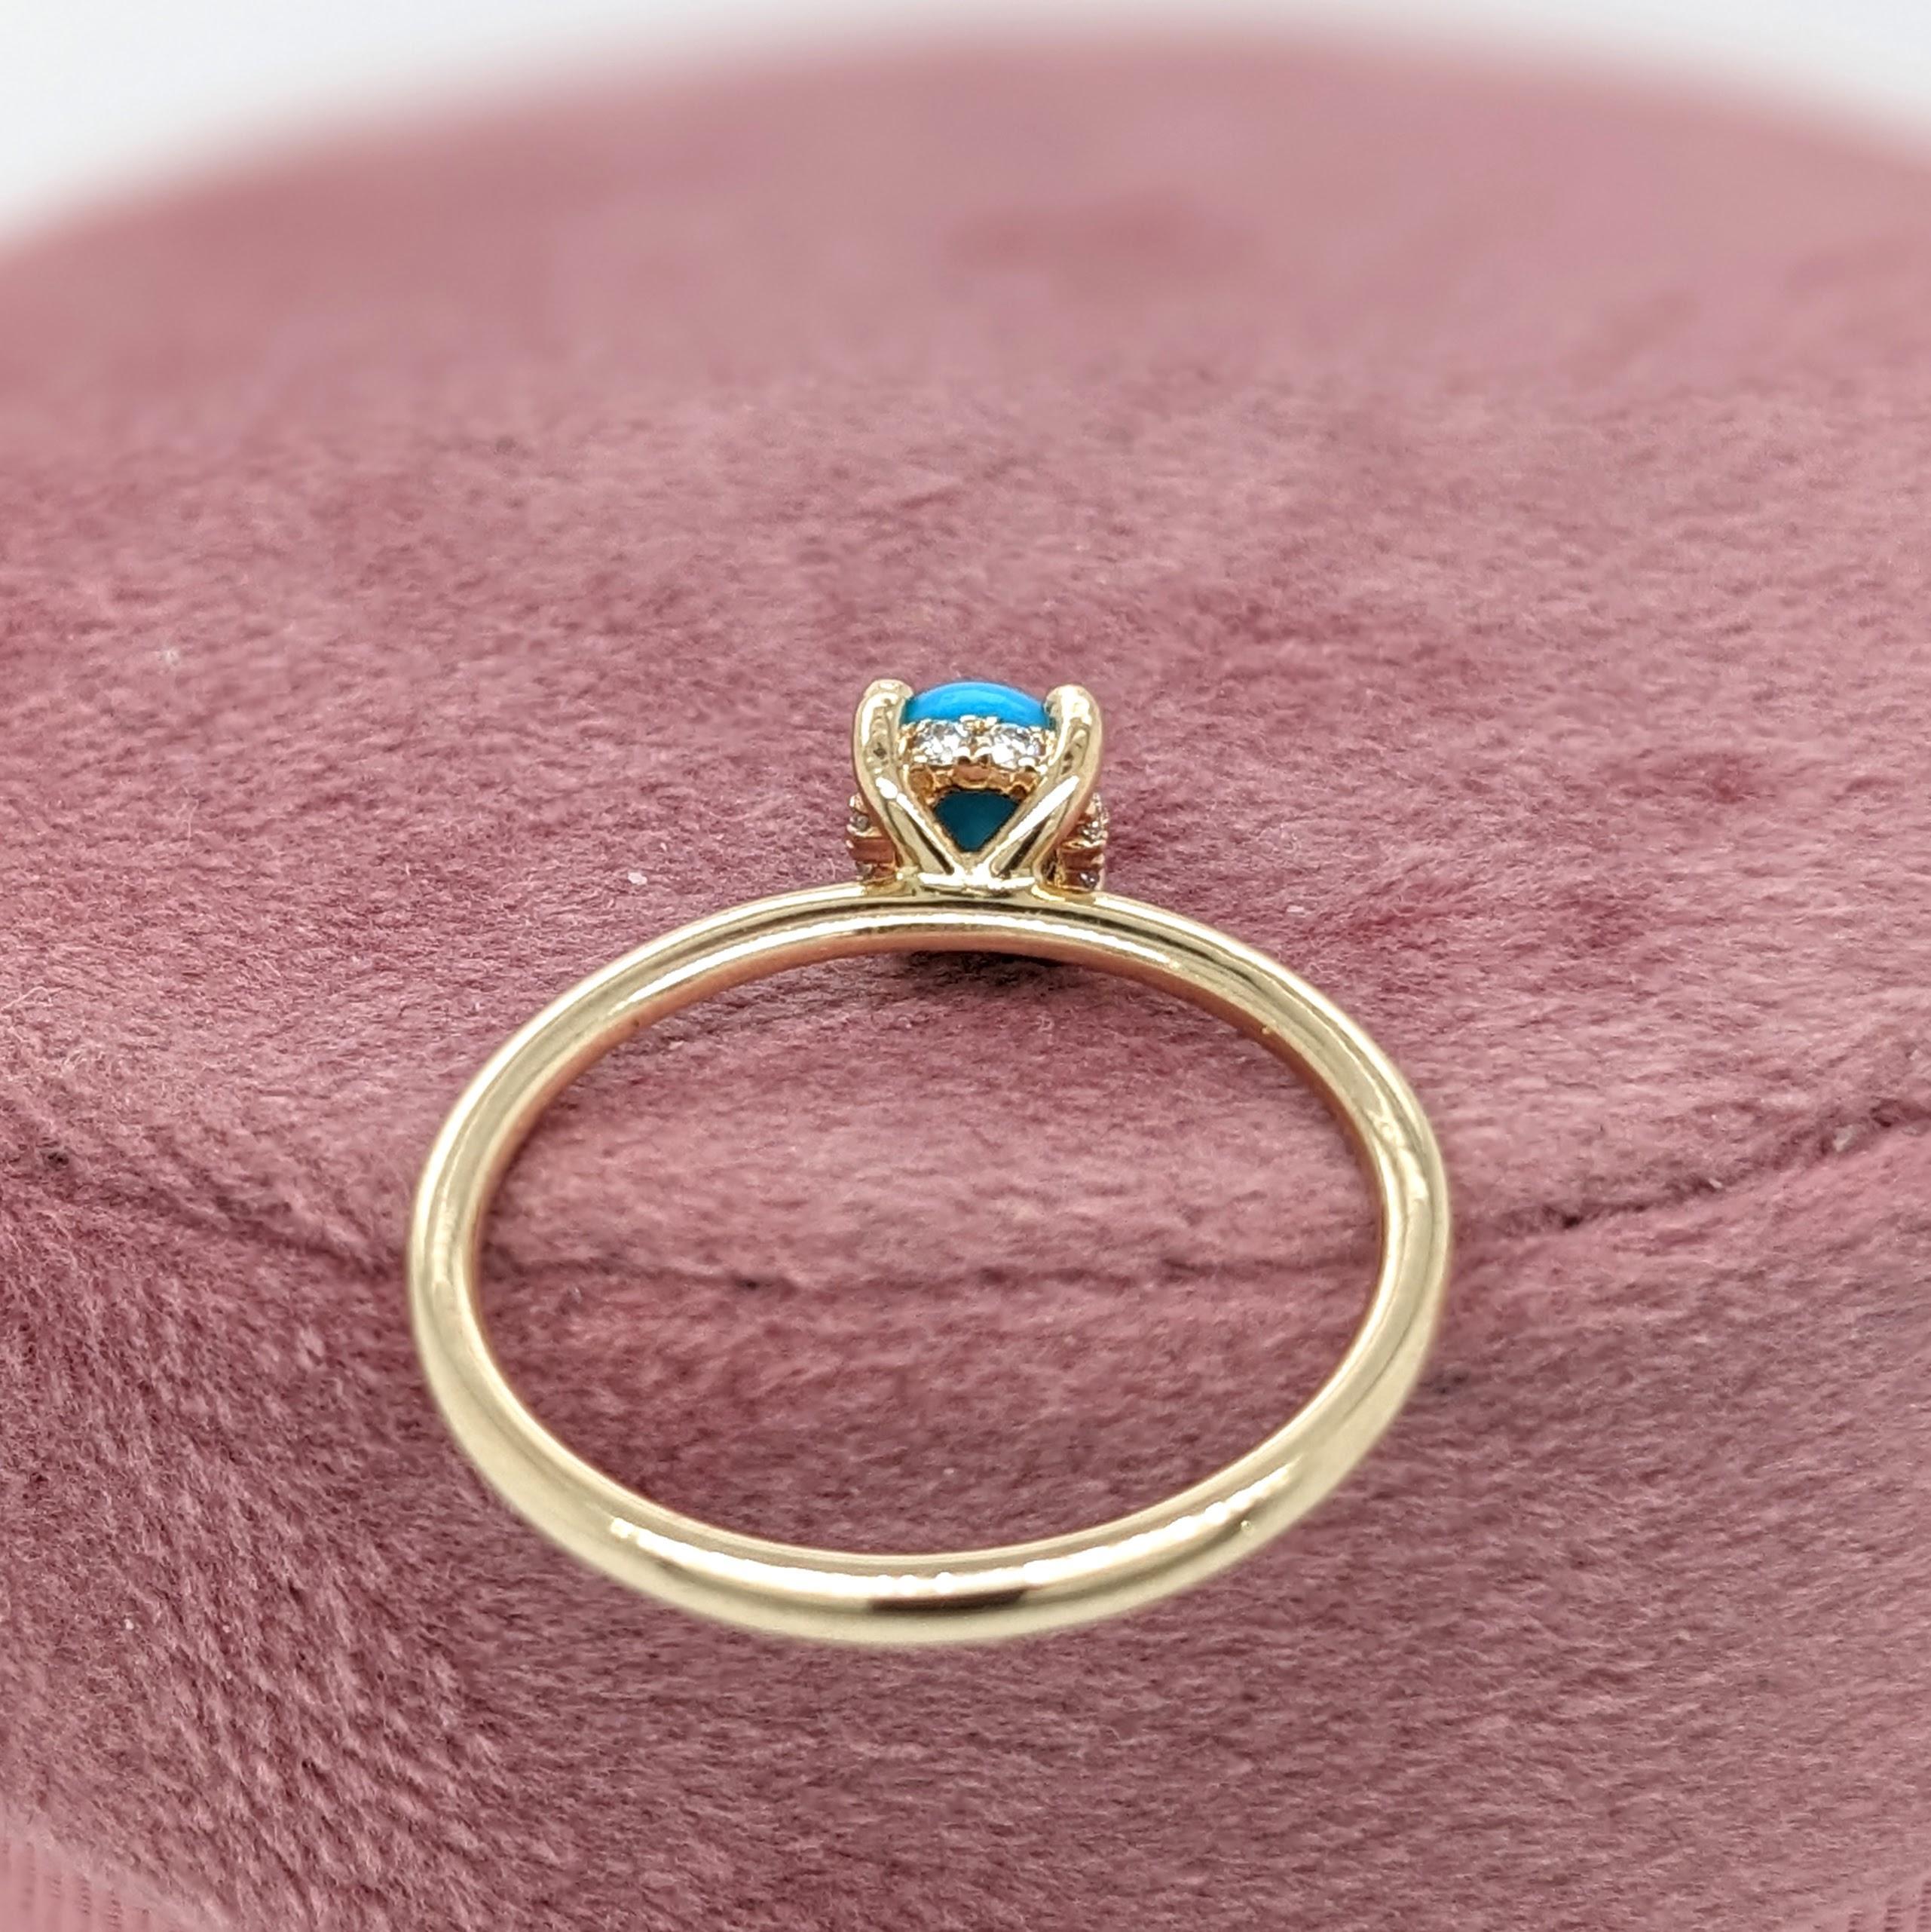 Women's Turquoise Ring w Earth Mined Diamonds in Solid 14K Yellow Gold Round 5mm For Sale